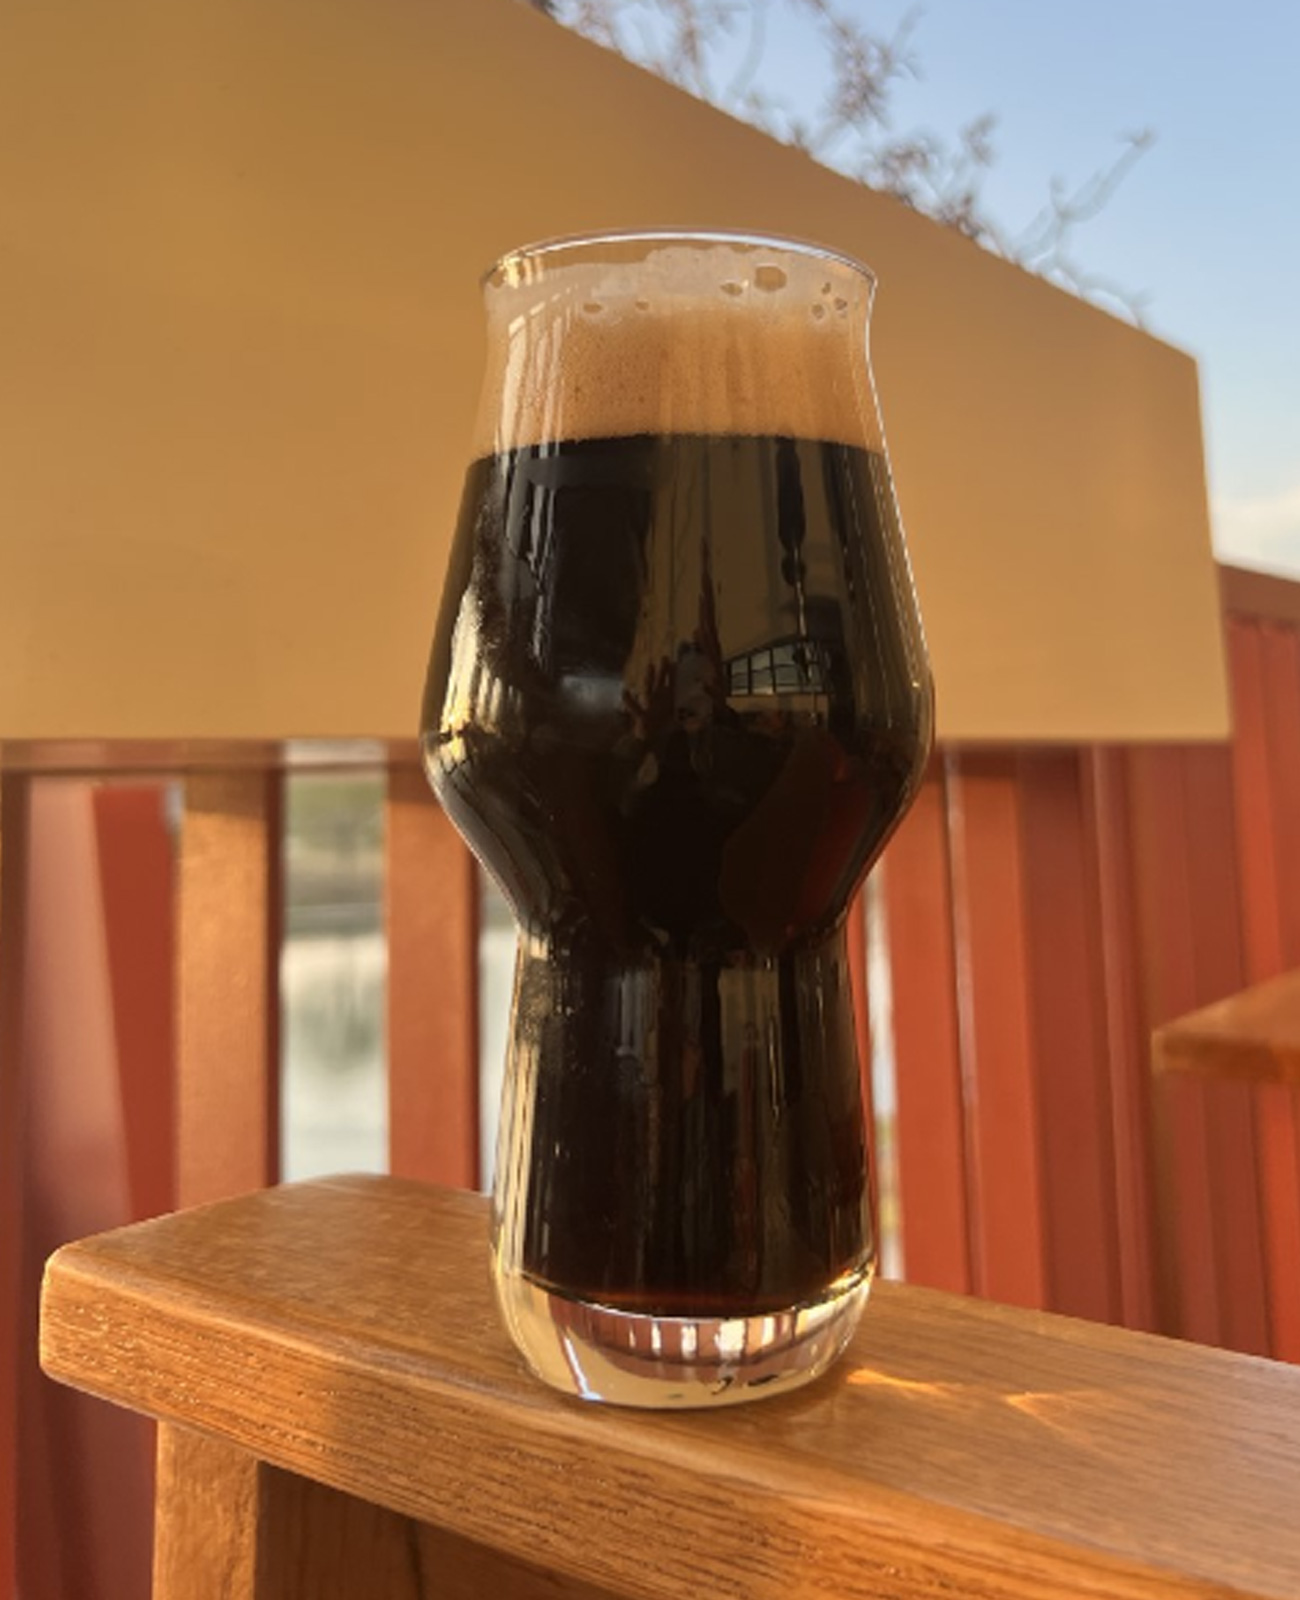 Bloomsday from our brewery in The Colony, TX